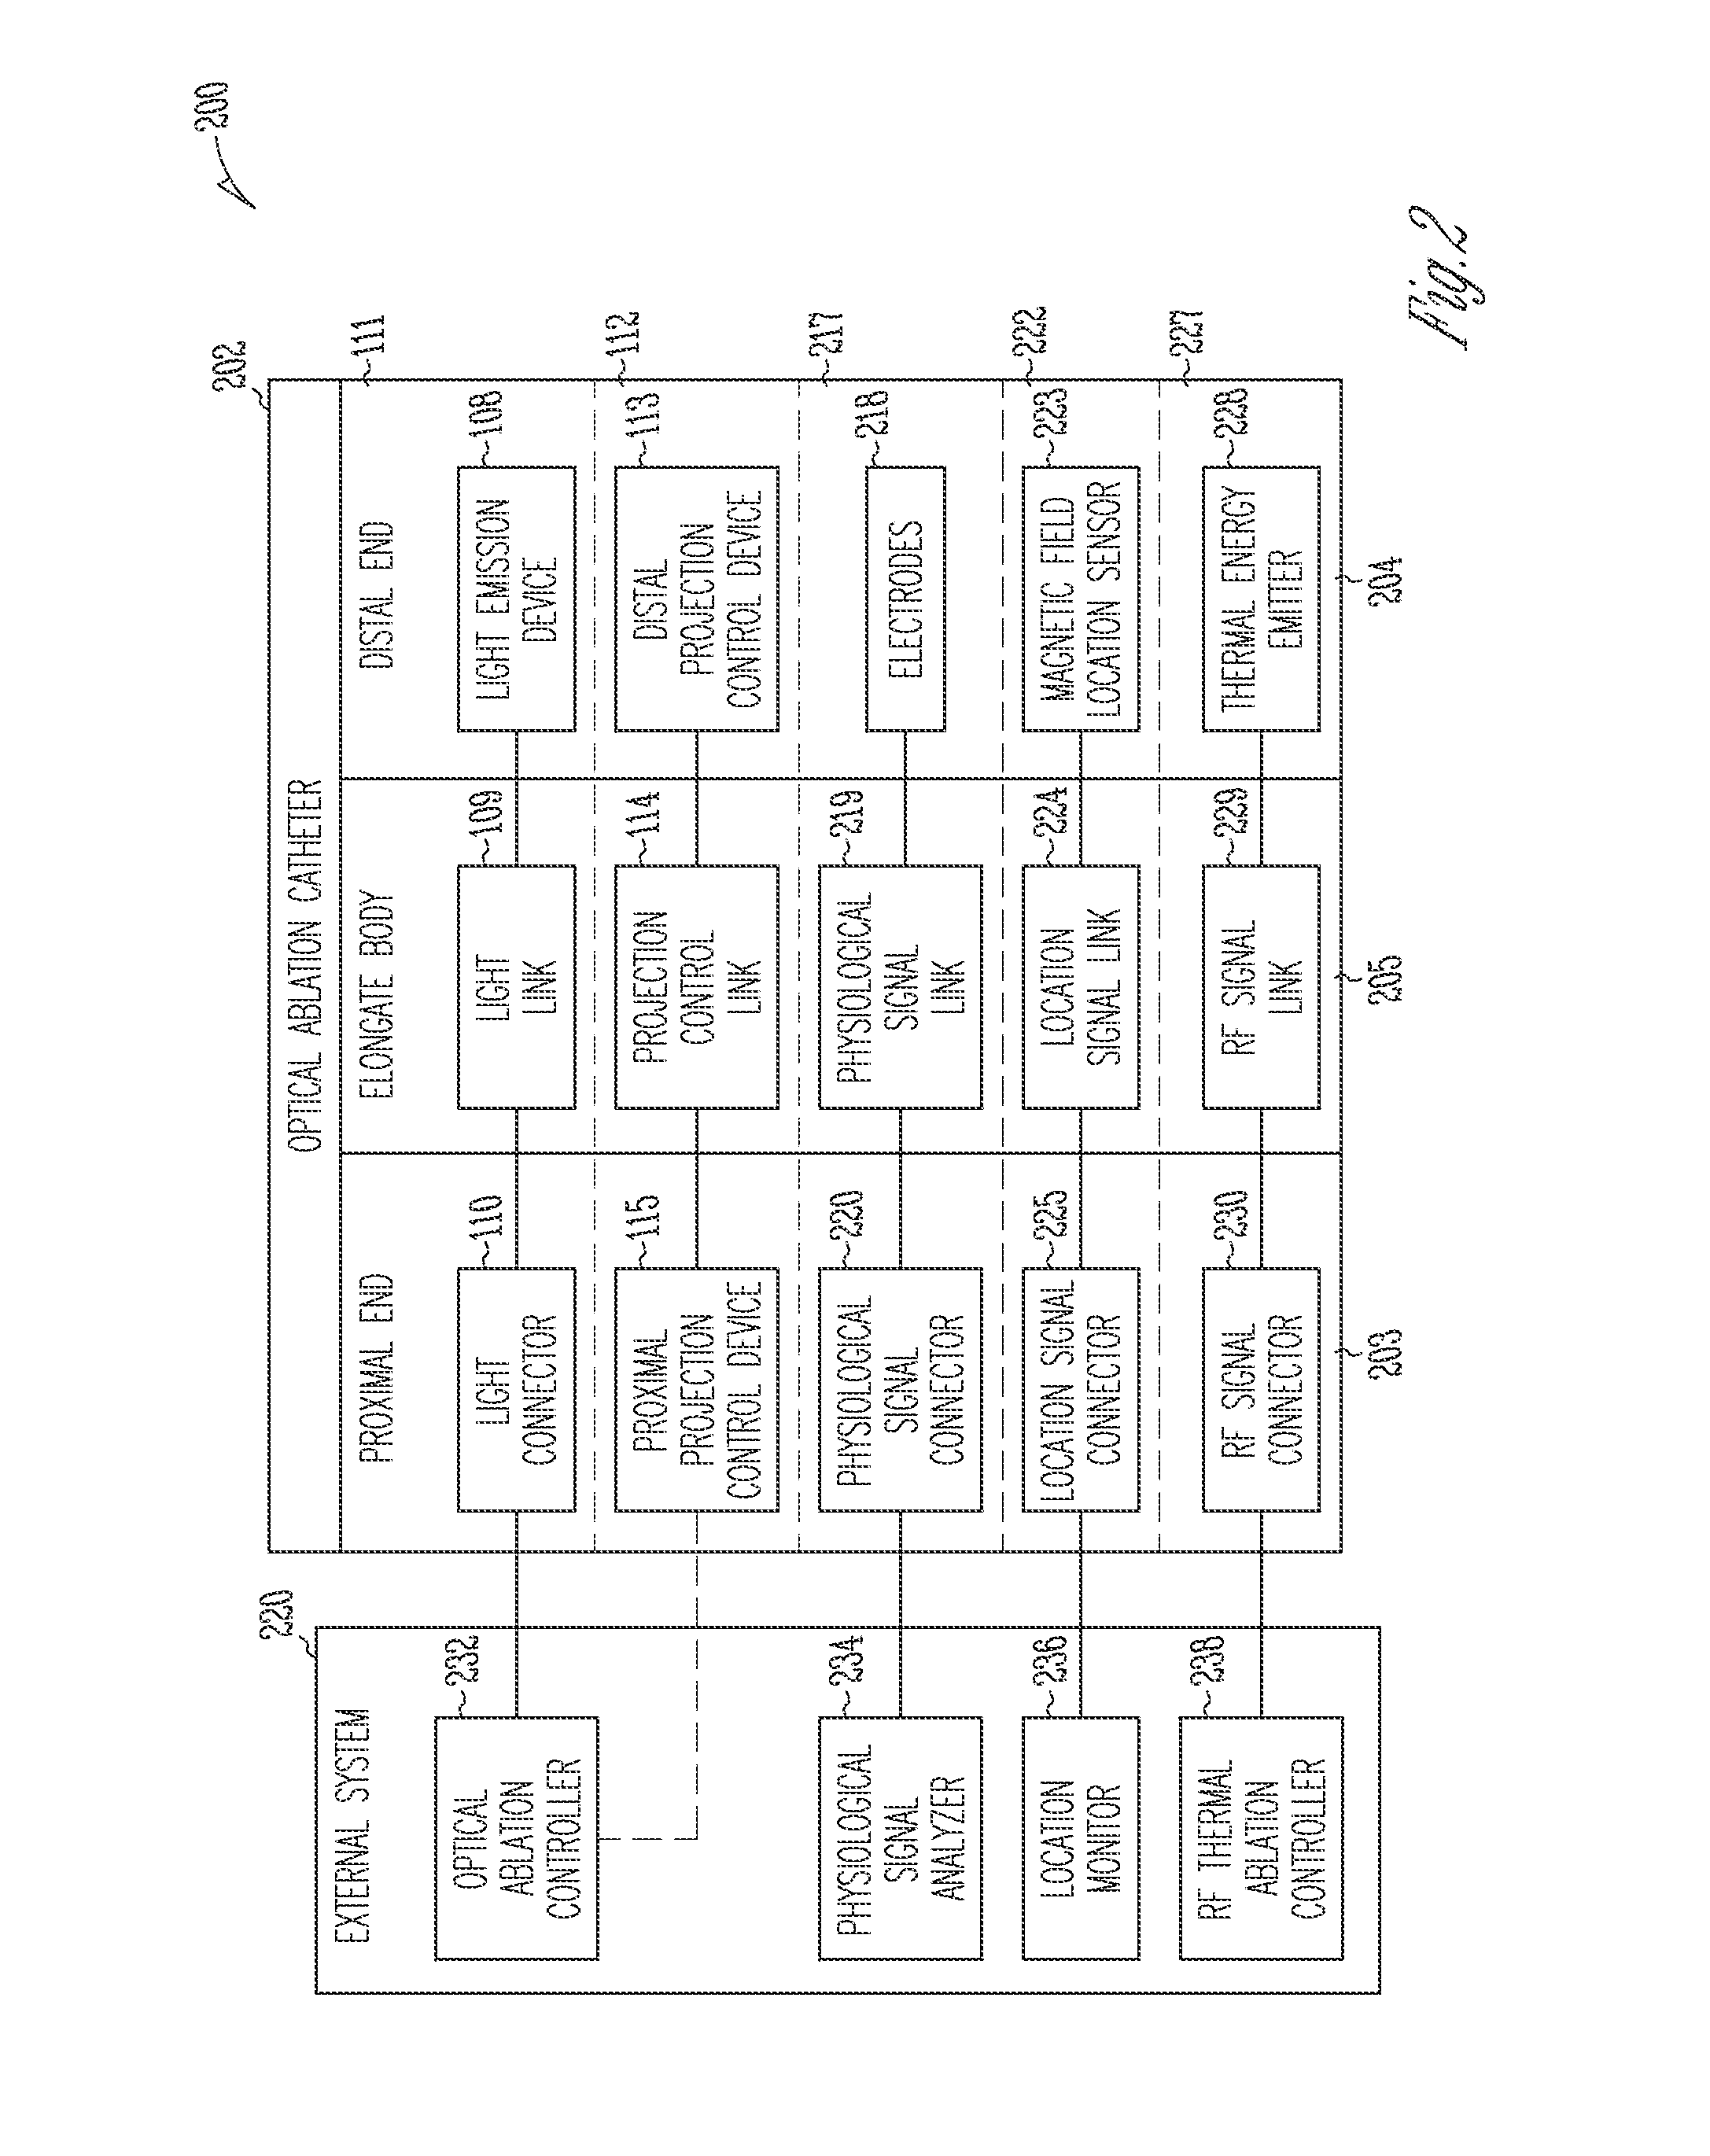 Systems and devices for photoablation